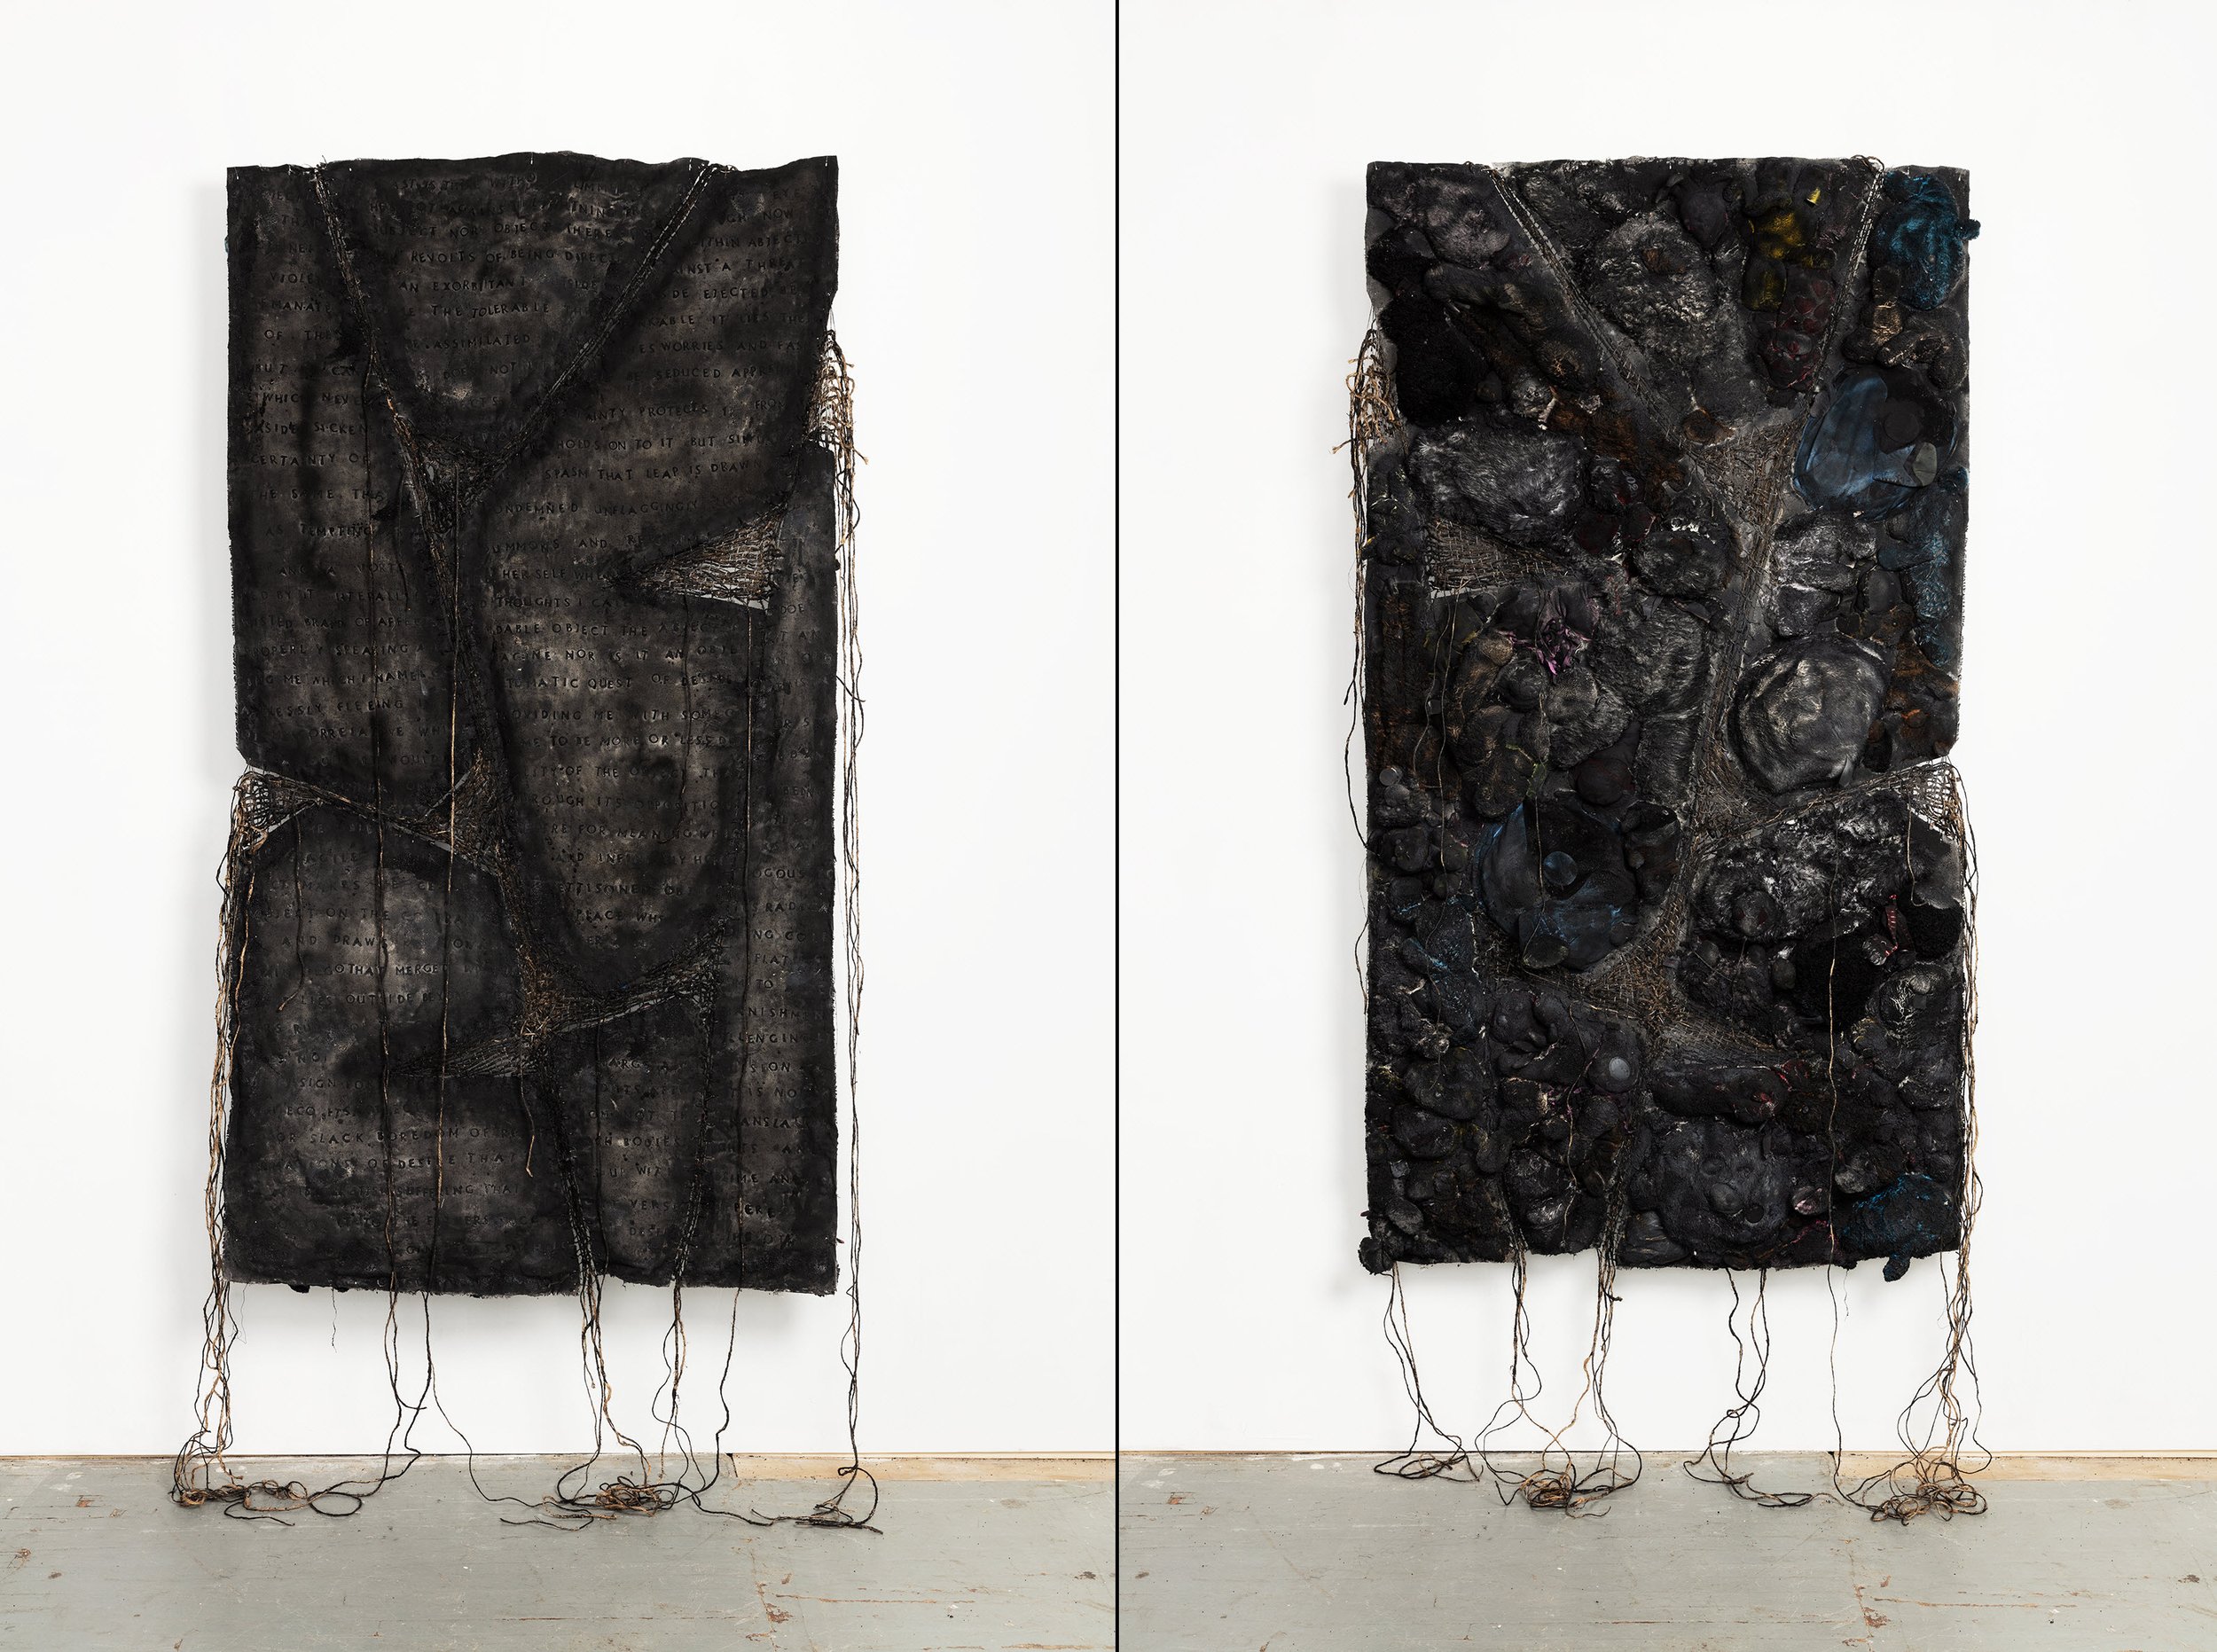   Approaching Abjection , 2022-23 | 45 x 80 x 6 in. | paint, twine, dirt, sand, fiber fill and salvaged stuffed animals on fabric | doublesided 